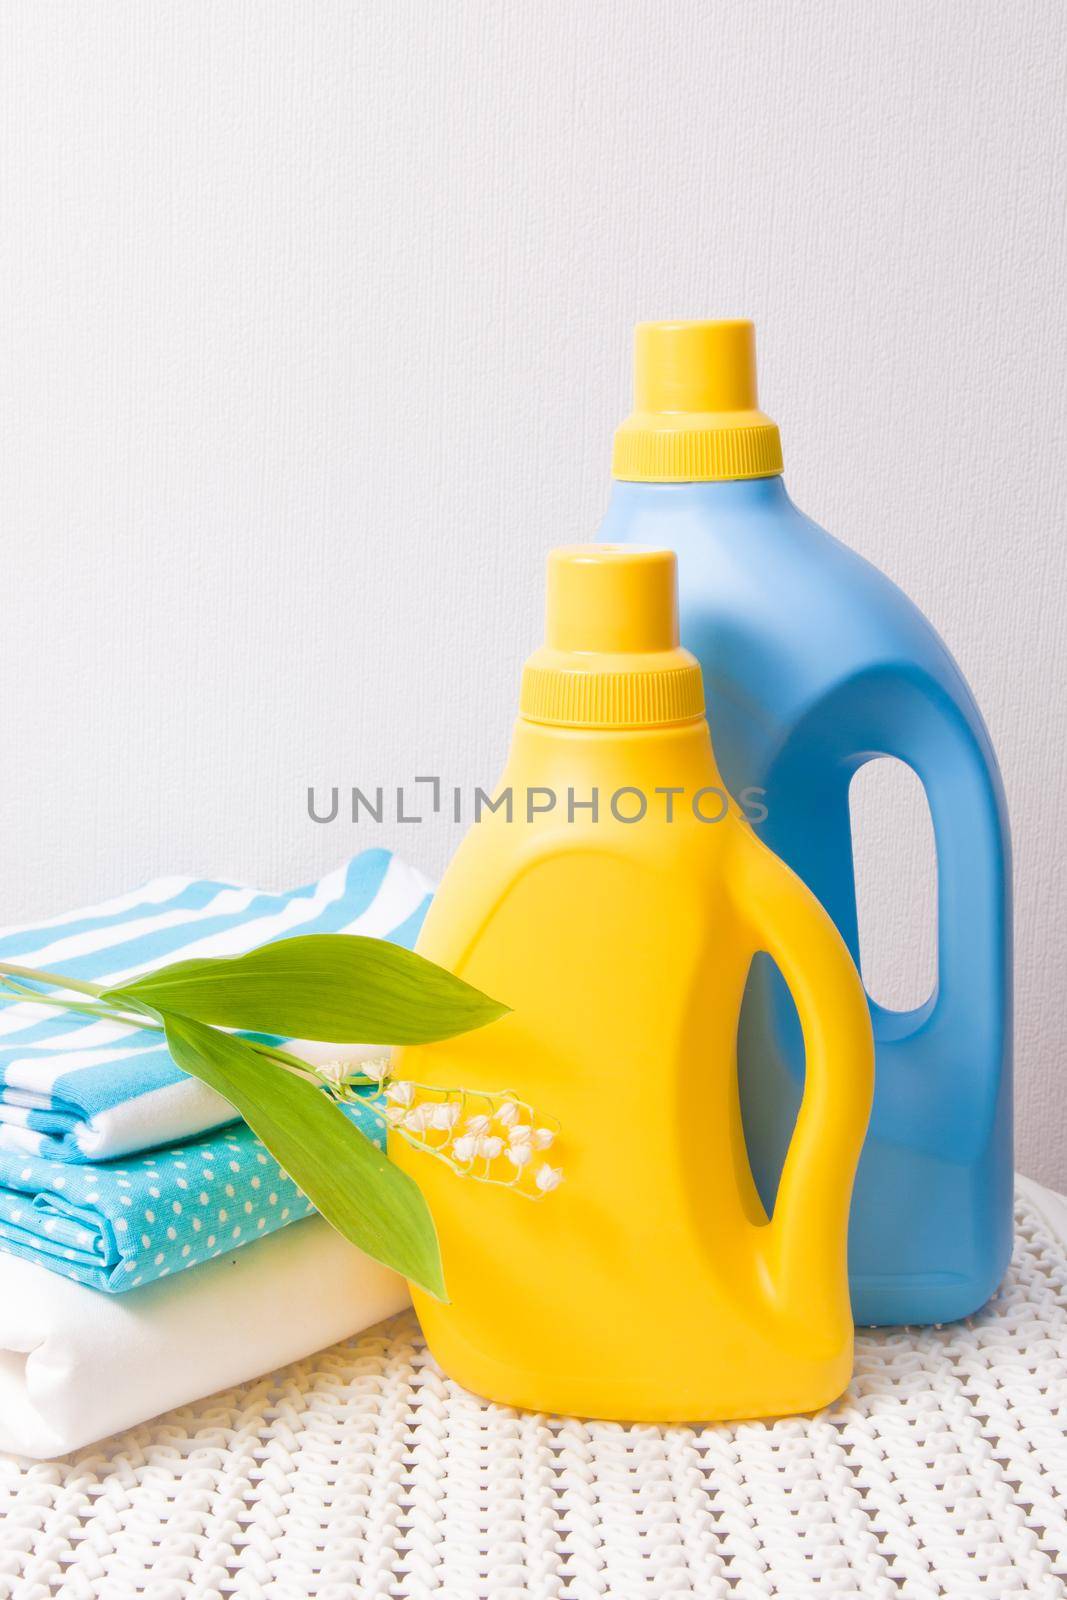 colored fabric clothes, lily of the valley flower, washing gel and fabric softener on a captive basket, yellow and blue bottles for gel without labels